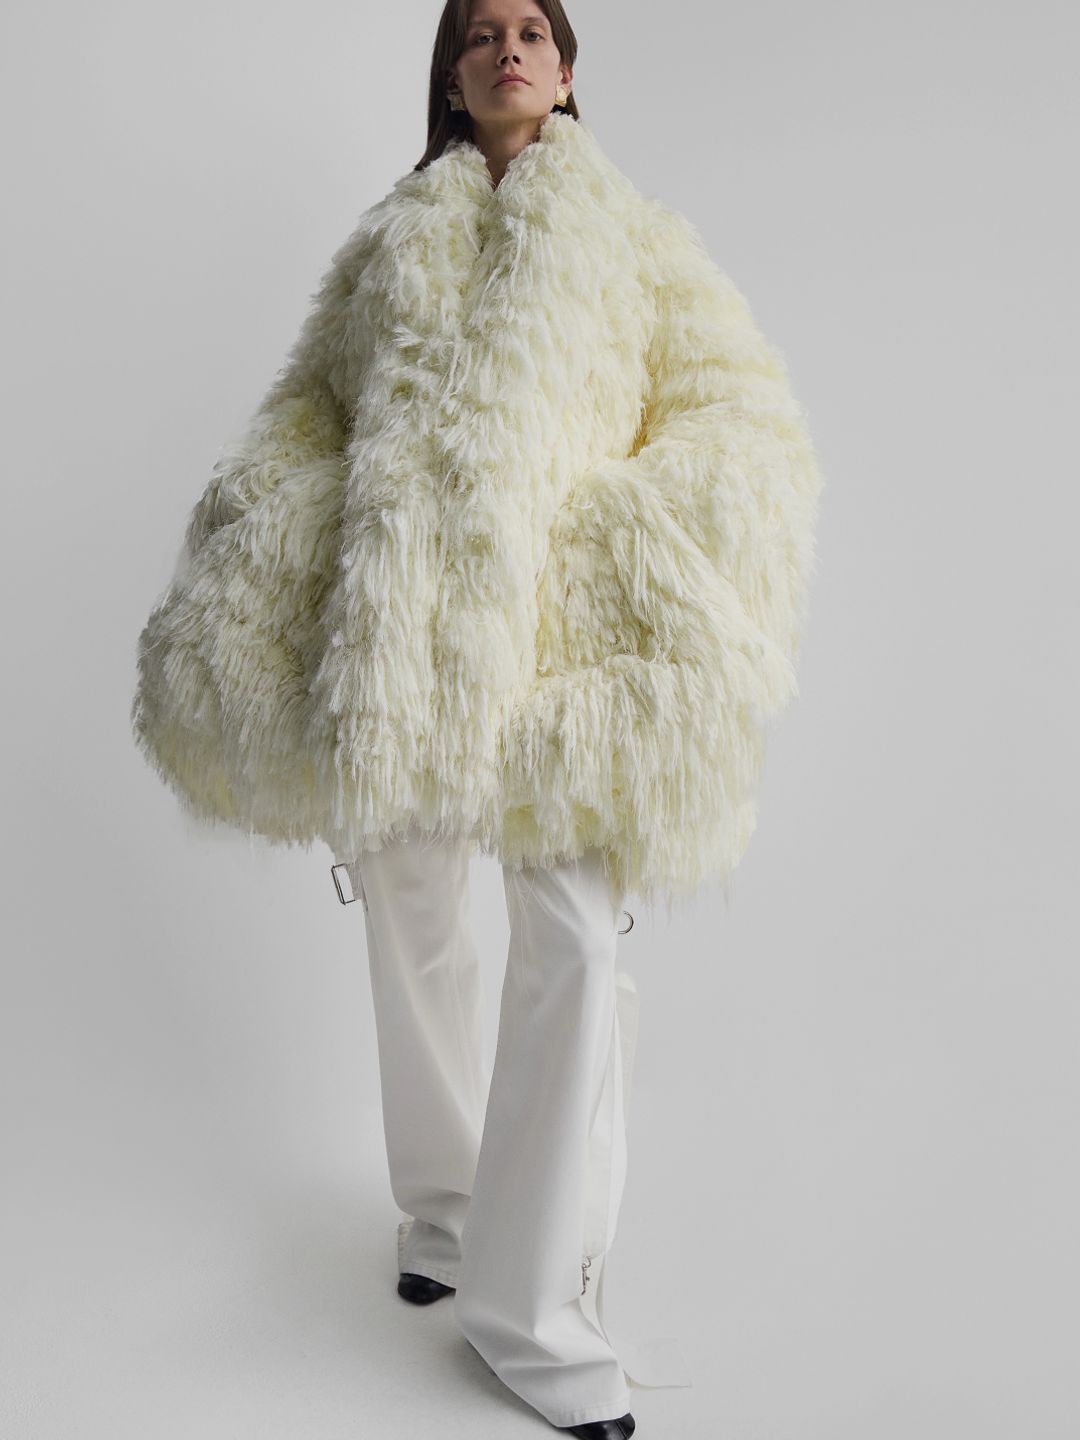 Hand-Combed Embroidered Coat In Cream Viscose - Phoebe Philo